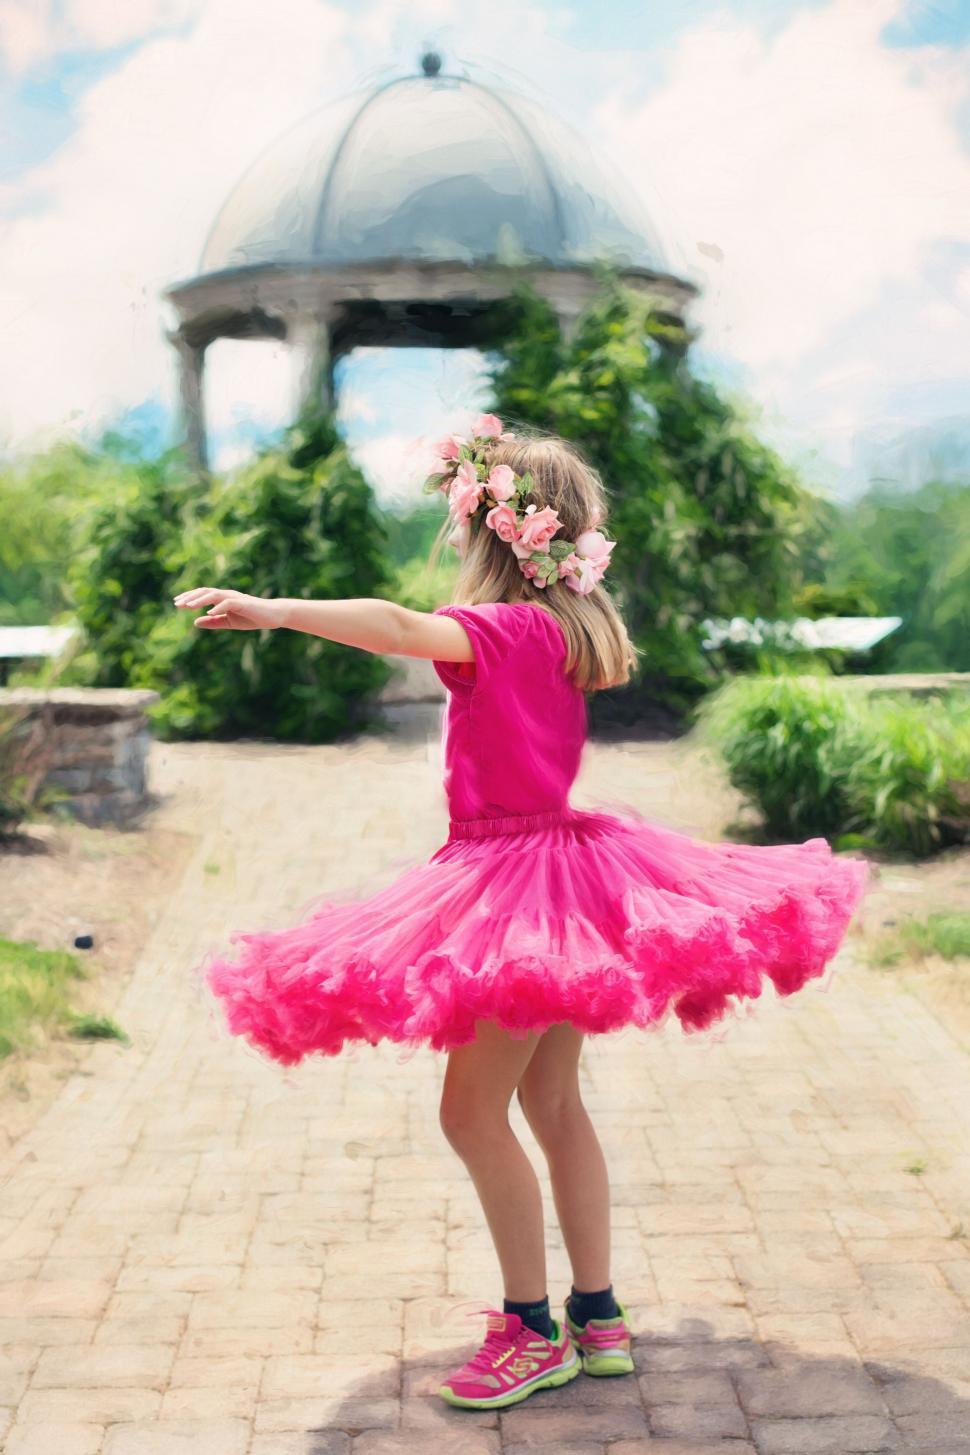 Free Image of Little Girl in pink dress dancing on walking path in the park 